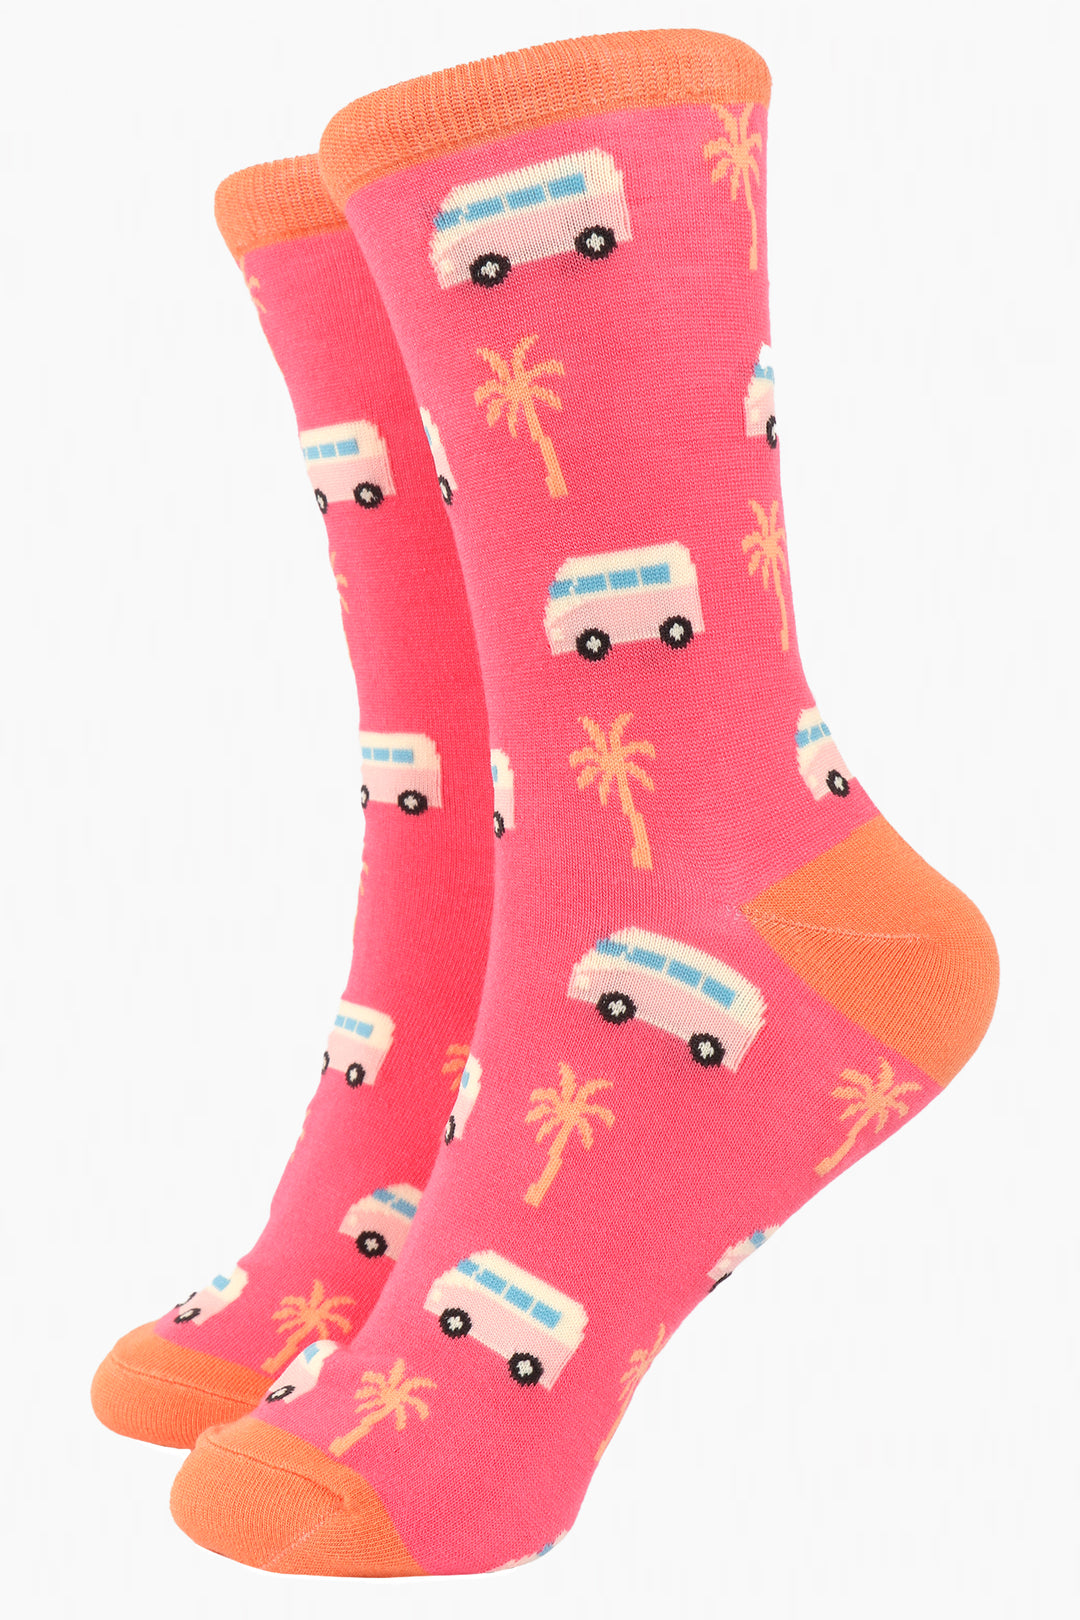 pink bamboo socks with coral heel, toe and cuff with an all over pattern of campervans and palm trees